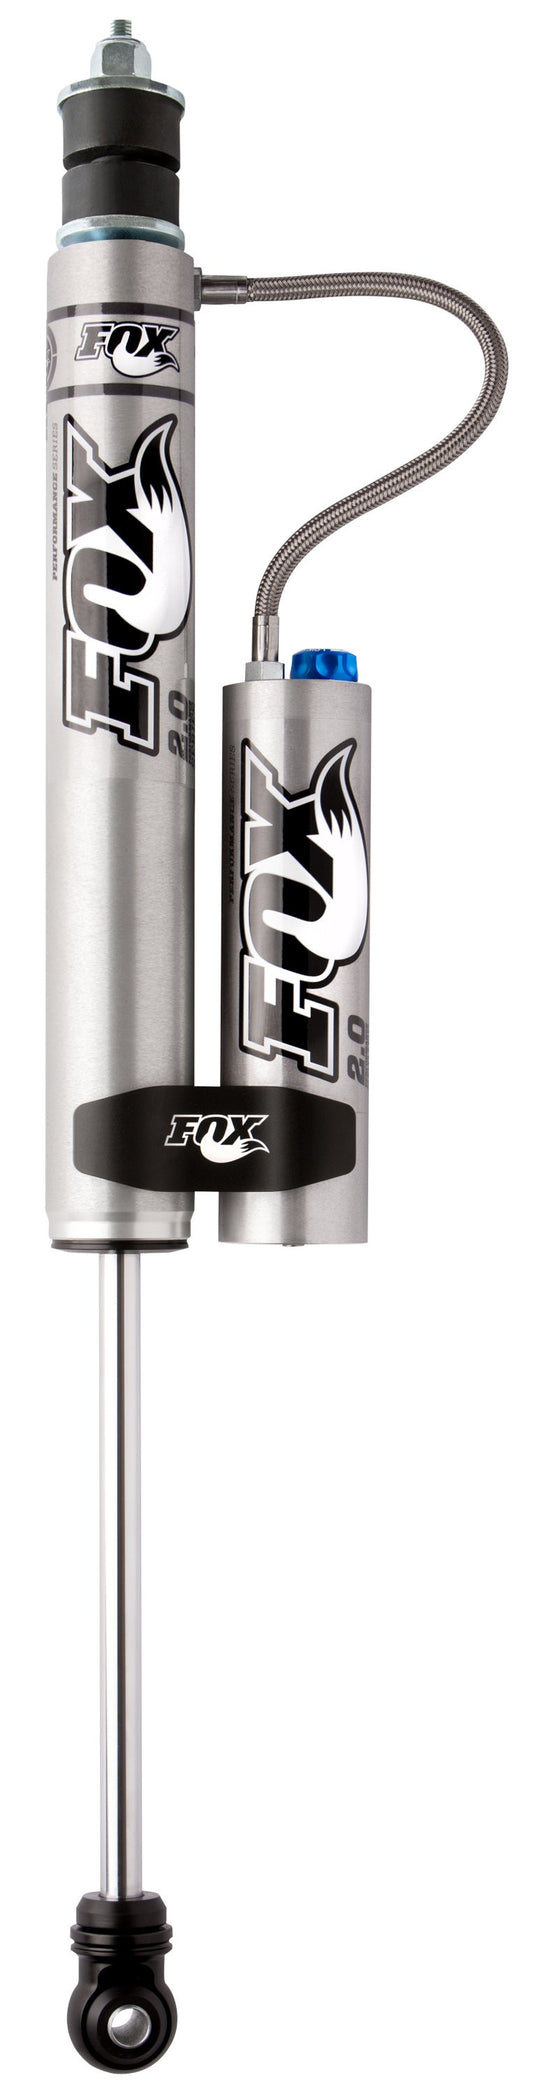 PERFORMANCE SERIES 2.0 SMOOTH BODY RESERVOIR SHOCK - ADJUSTABLE Lift: 4-6 2005-2016 Ford F-350 Super Duty FOX-985-26-106 - 2.0 SHOCK - FOX Offroad Shocks - Texas Complete Truck Center